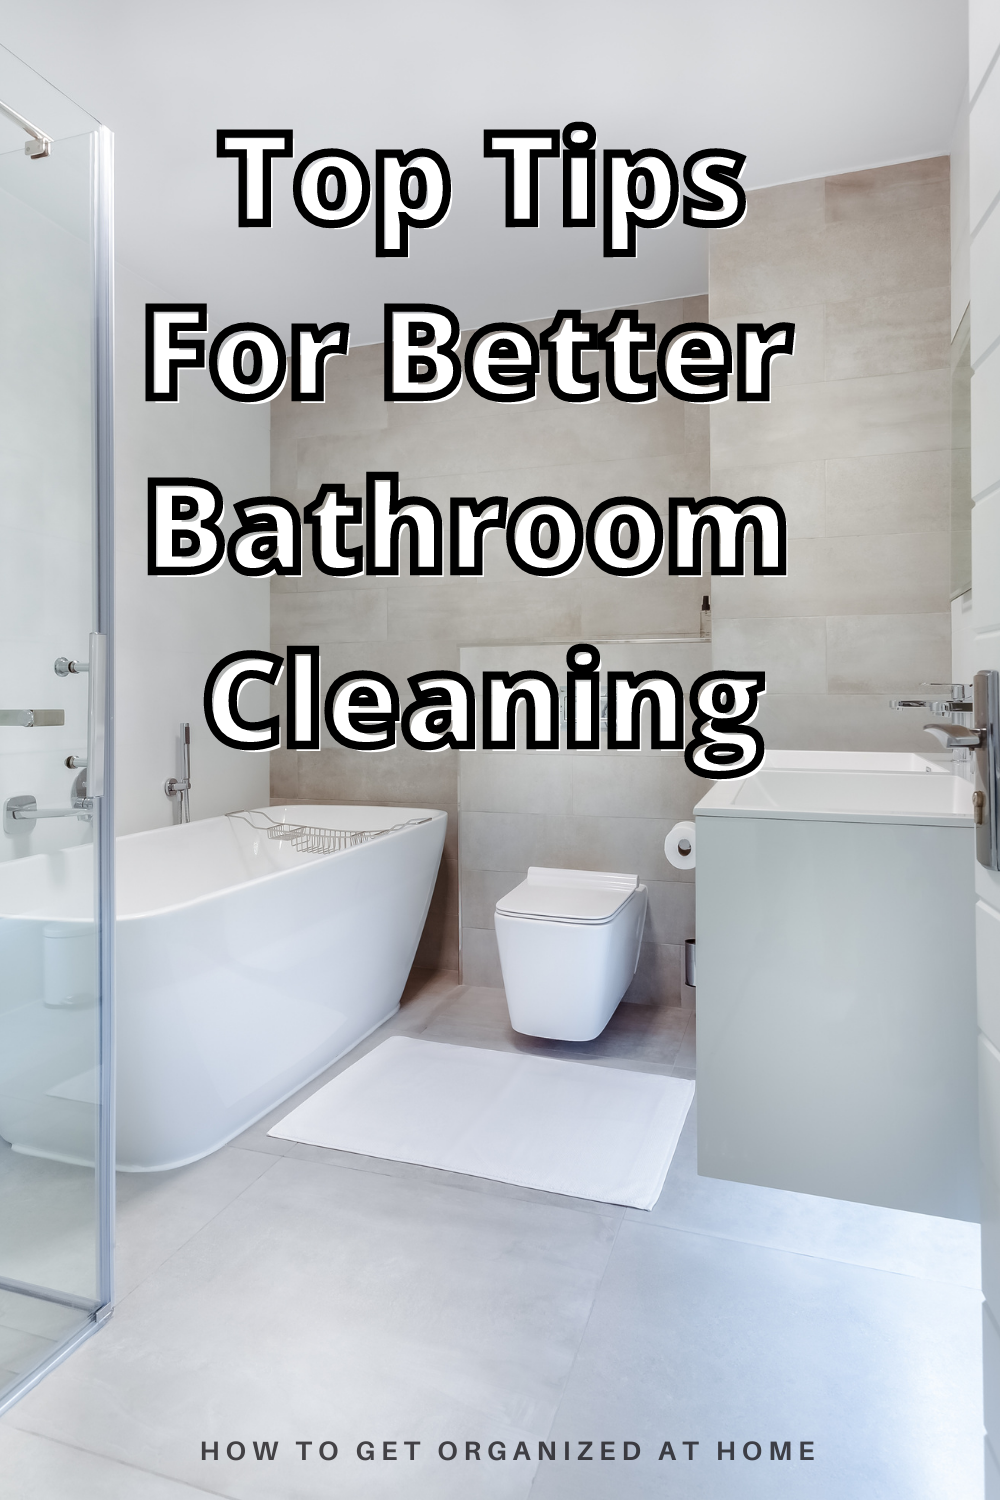 4 Bathroom Tile Cleaning Tips